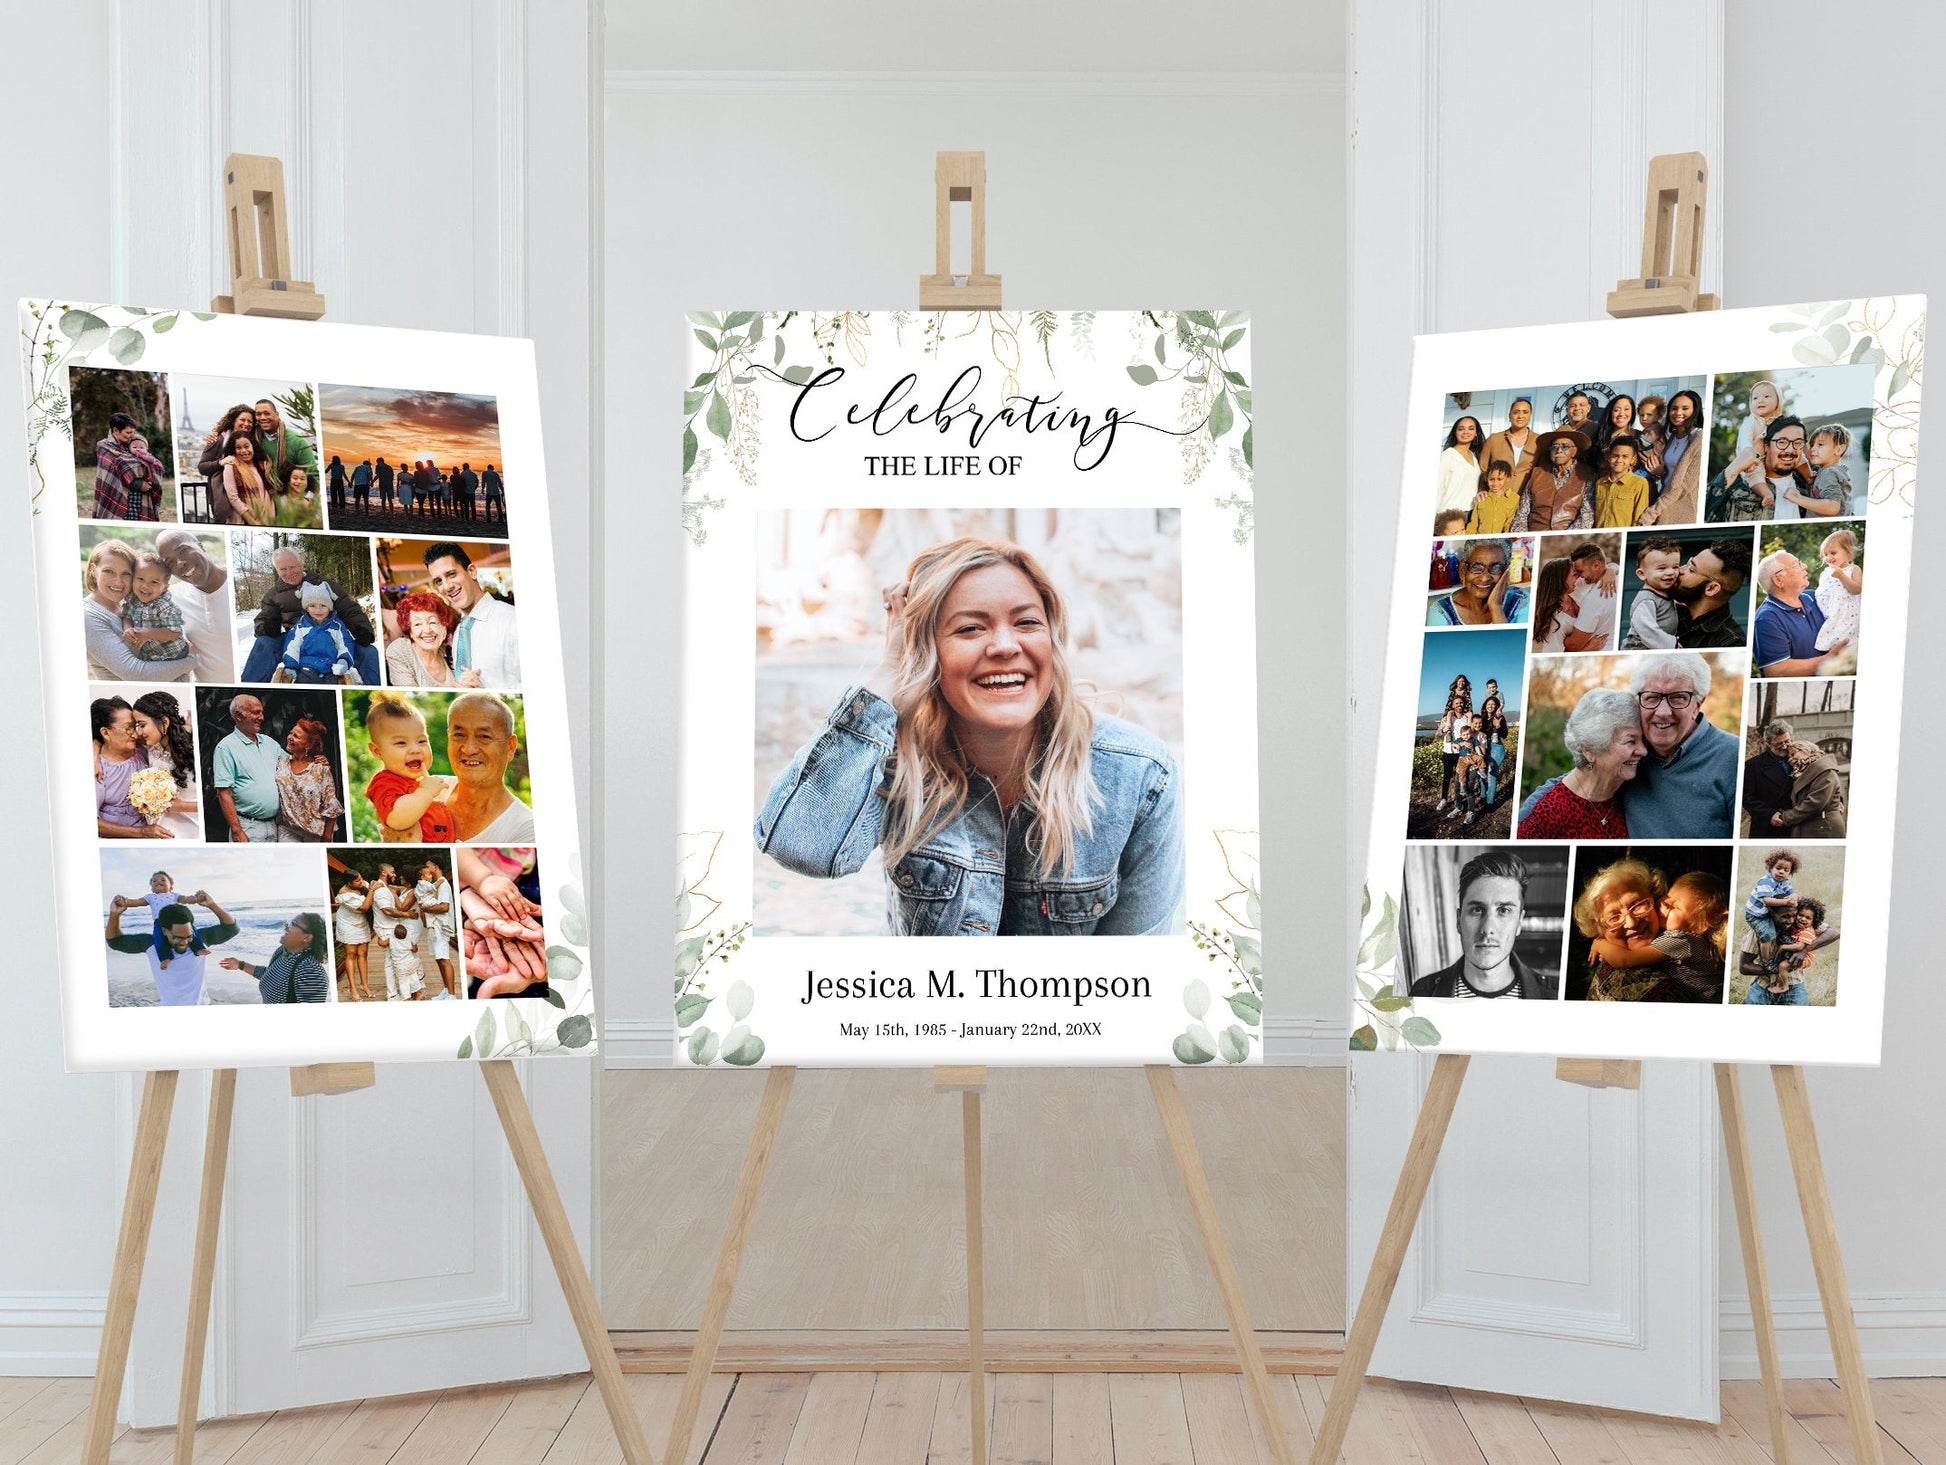 Suddle greenery throughout these 3 posters with photo collages